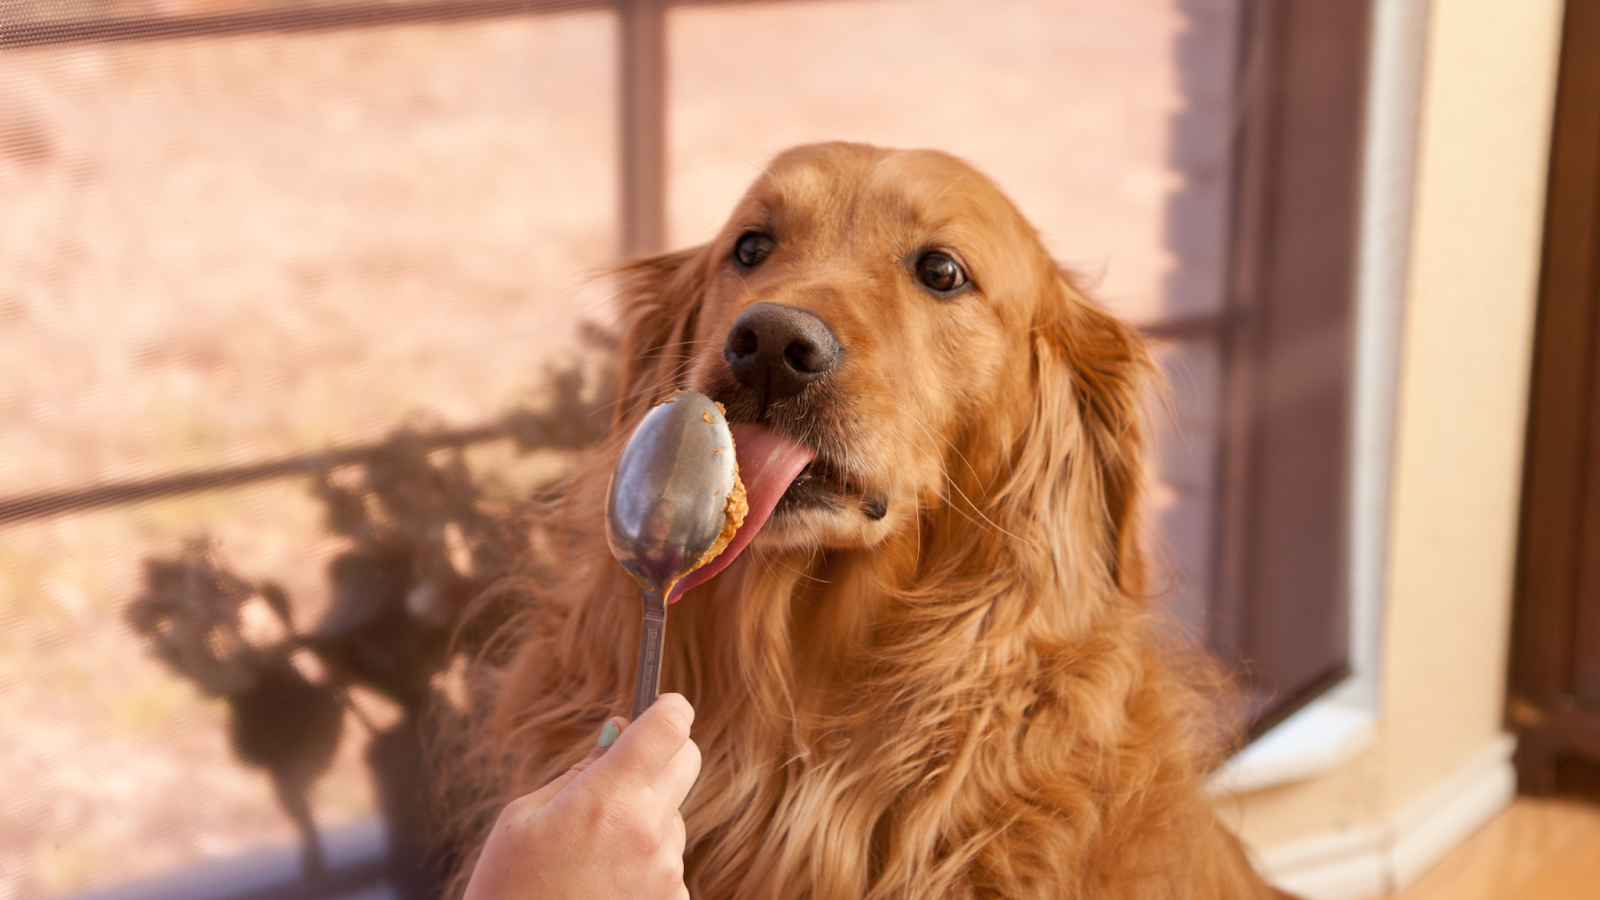 Artificial sweeteners are dangerous for your dog's health.